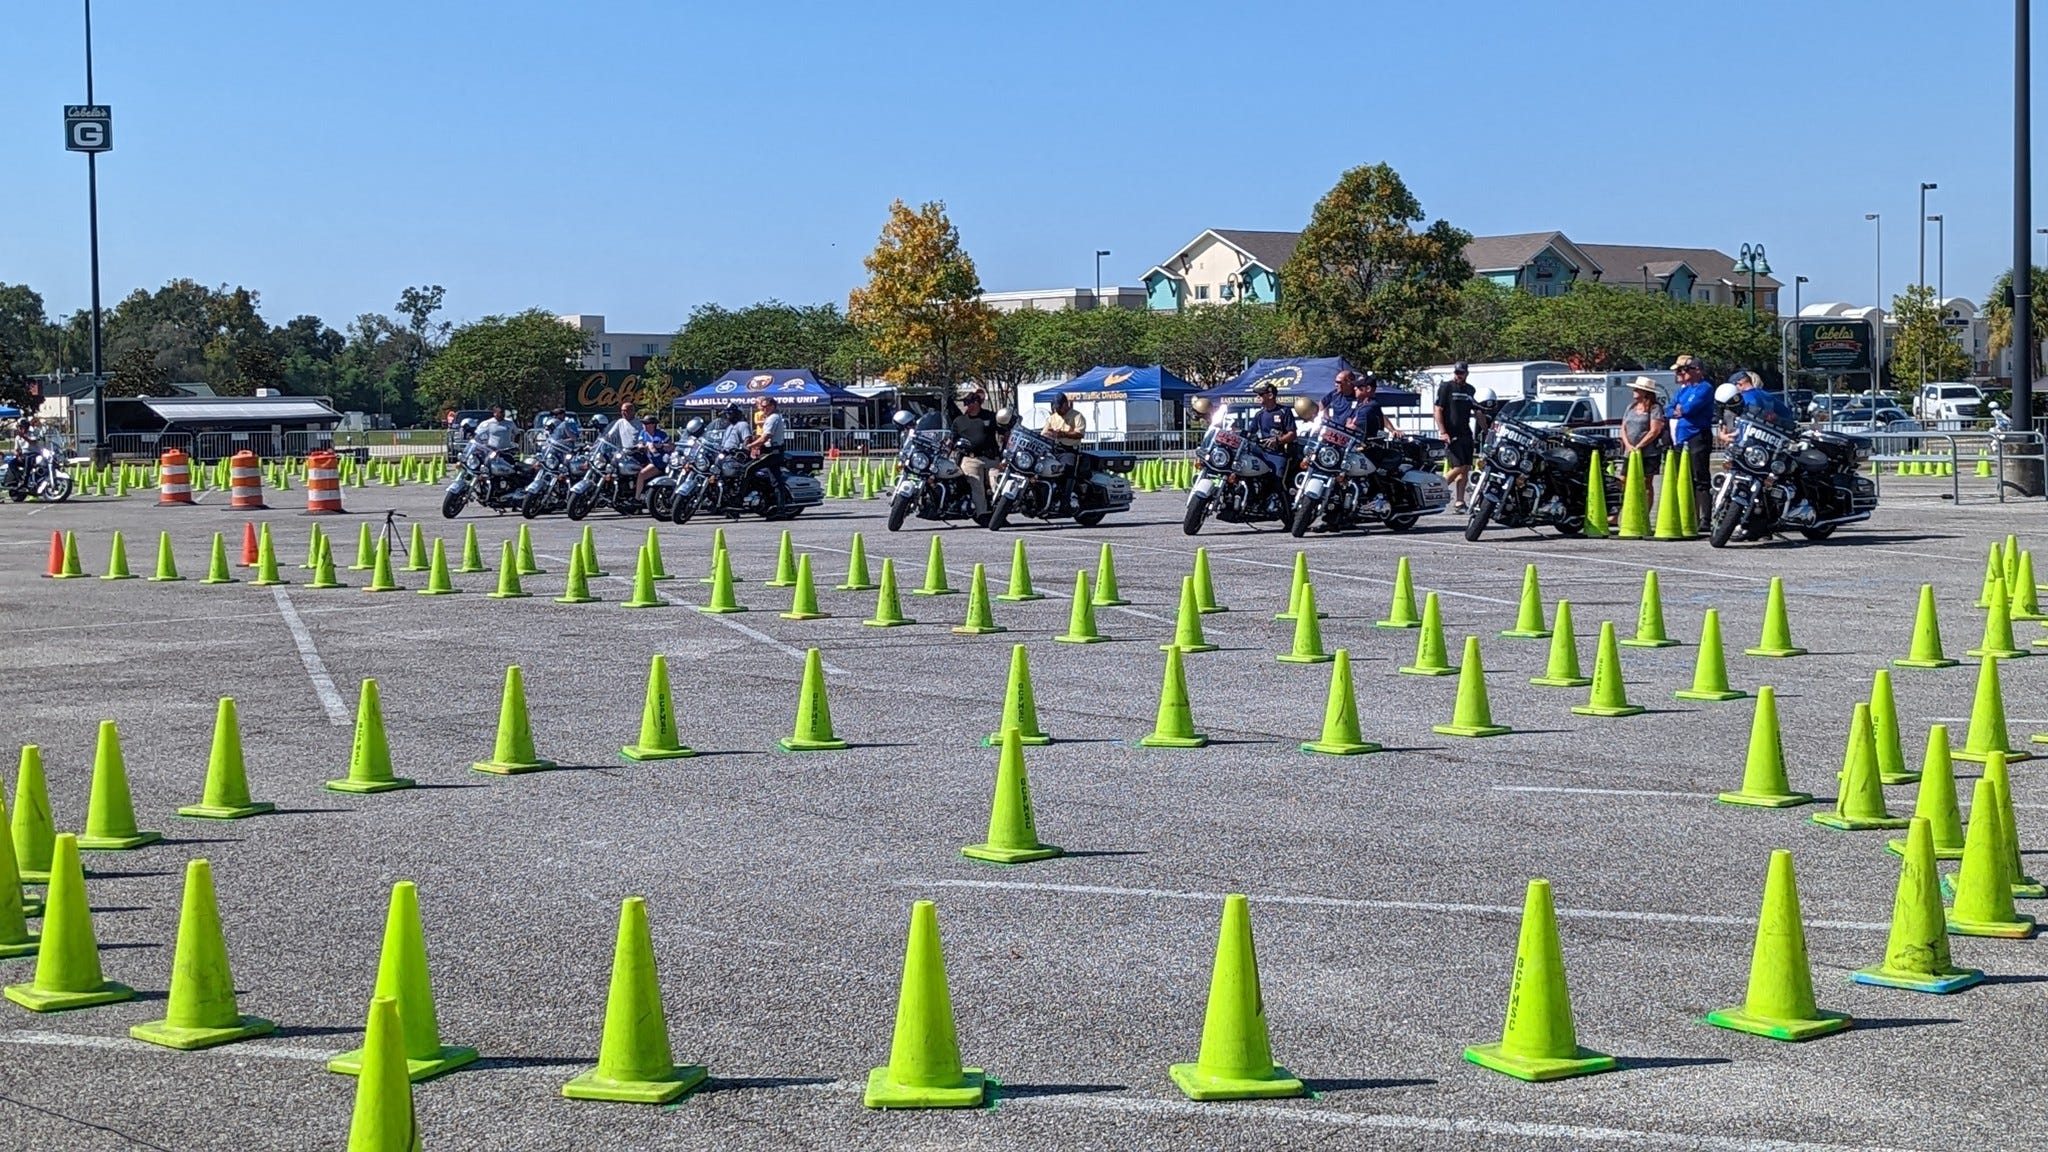 Hundreds of motor divisions from various law enforcement agencies across the country have been testing their skills at Cabelas in Gonzales.